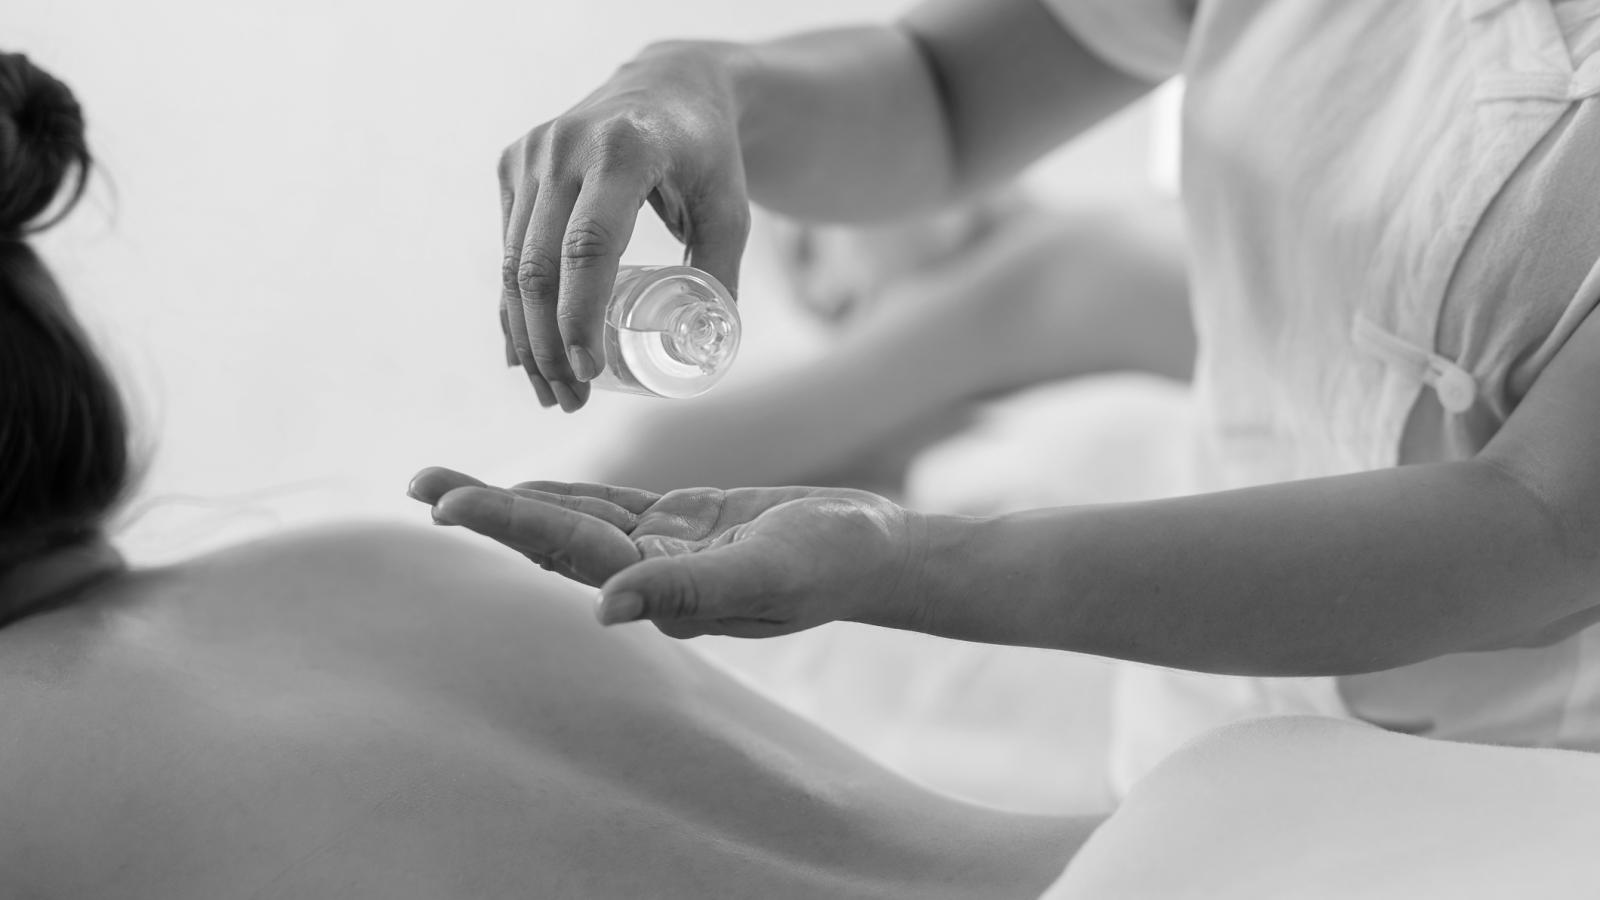 Massage oil being poured onto a person's back